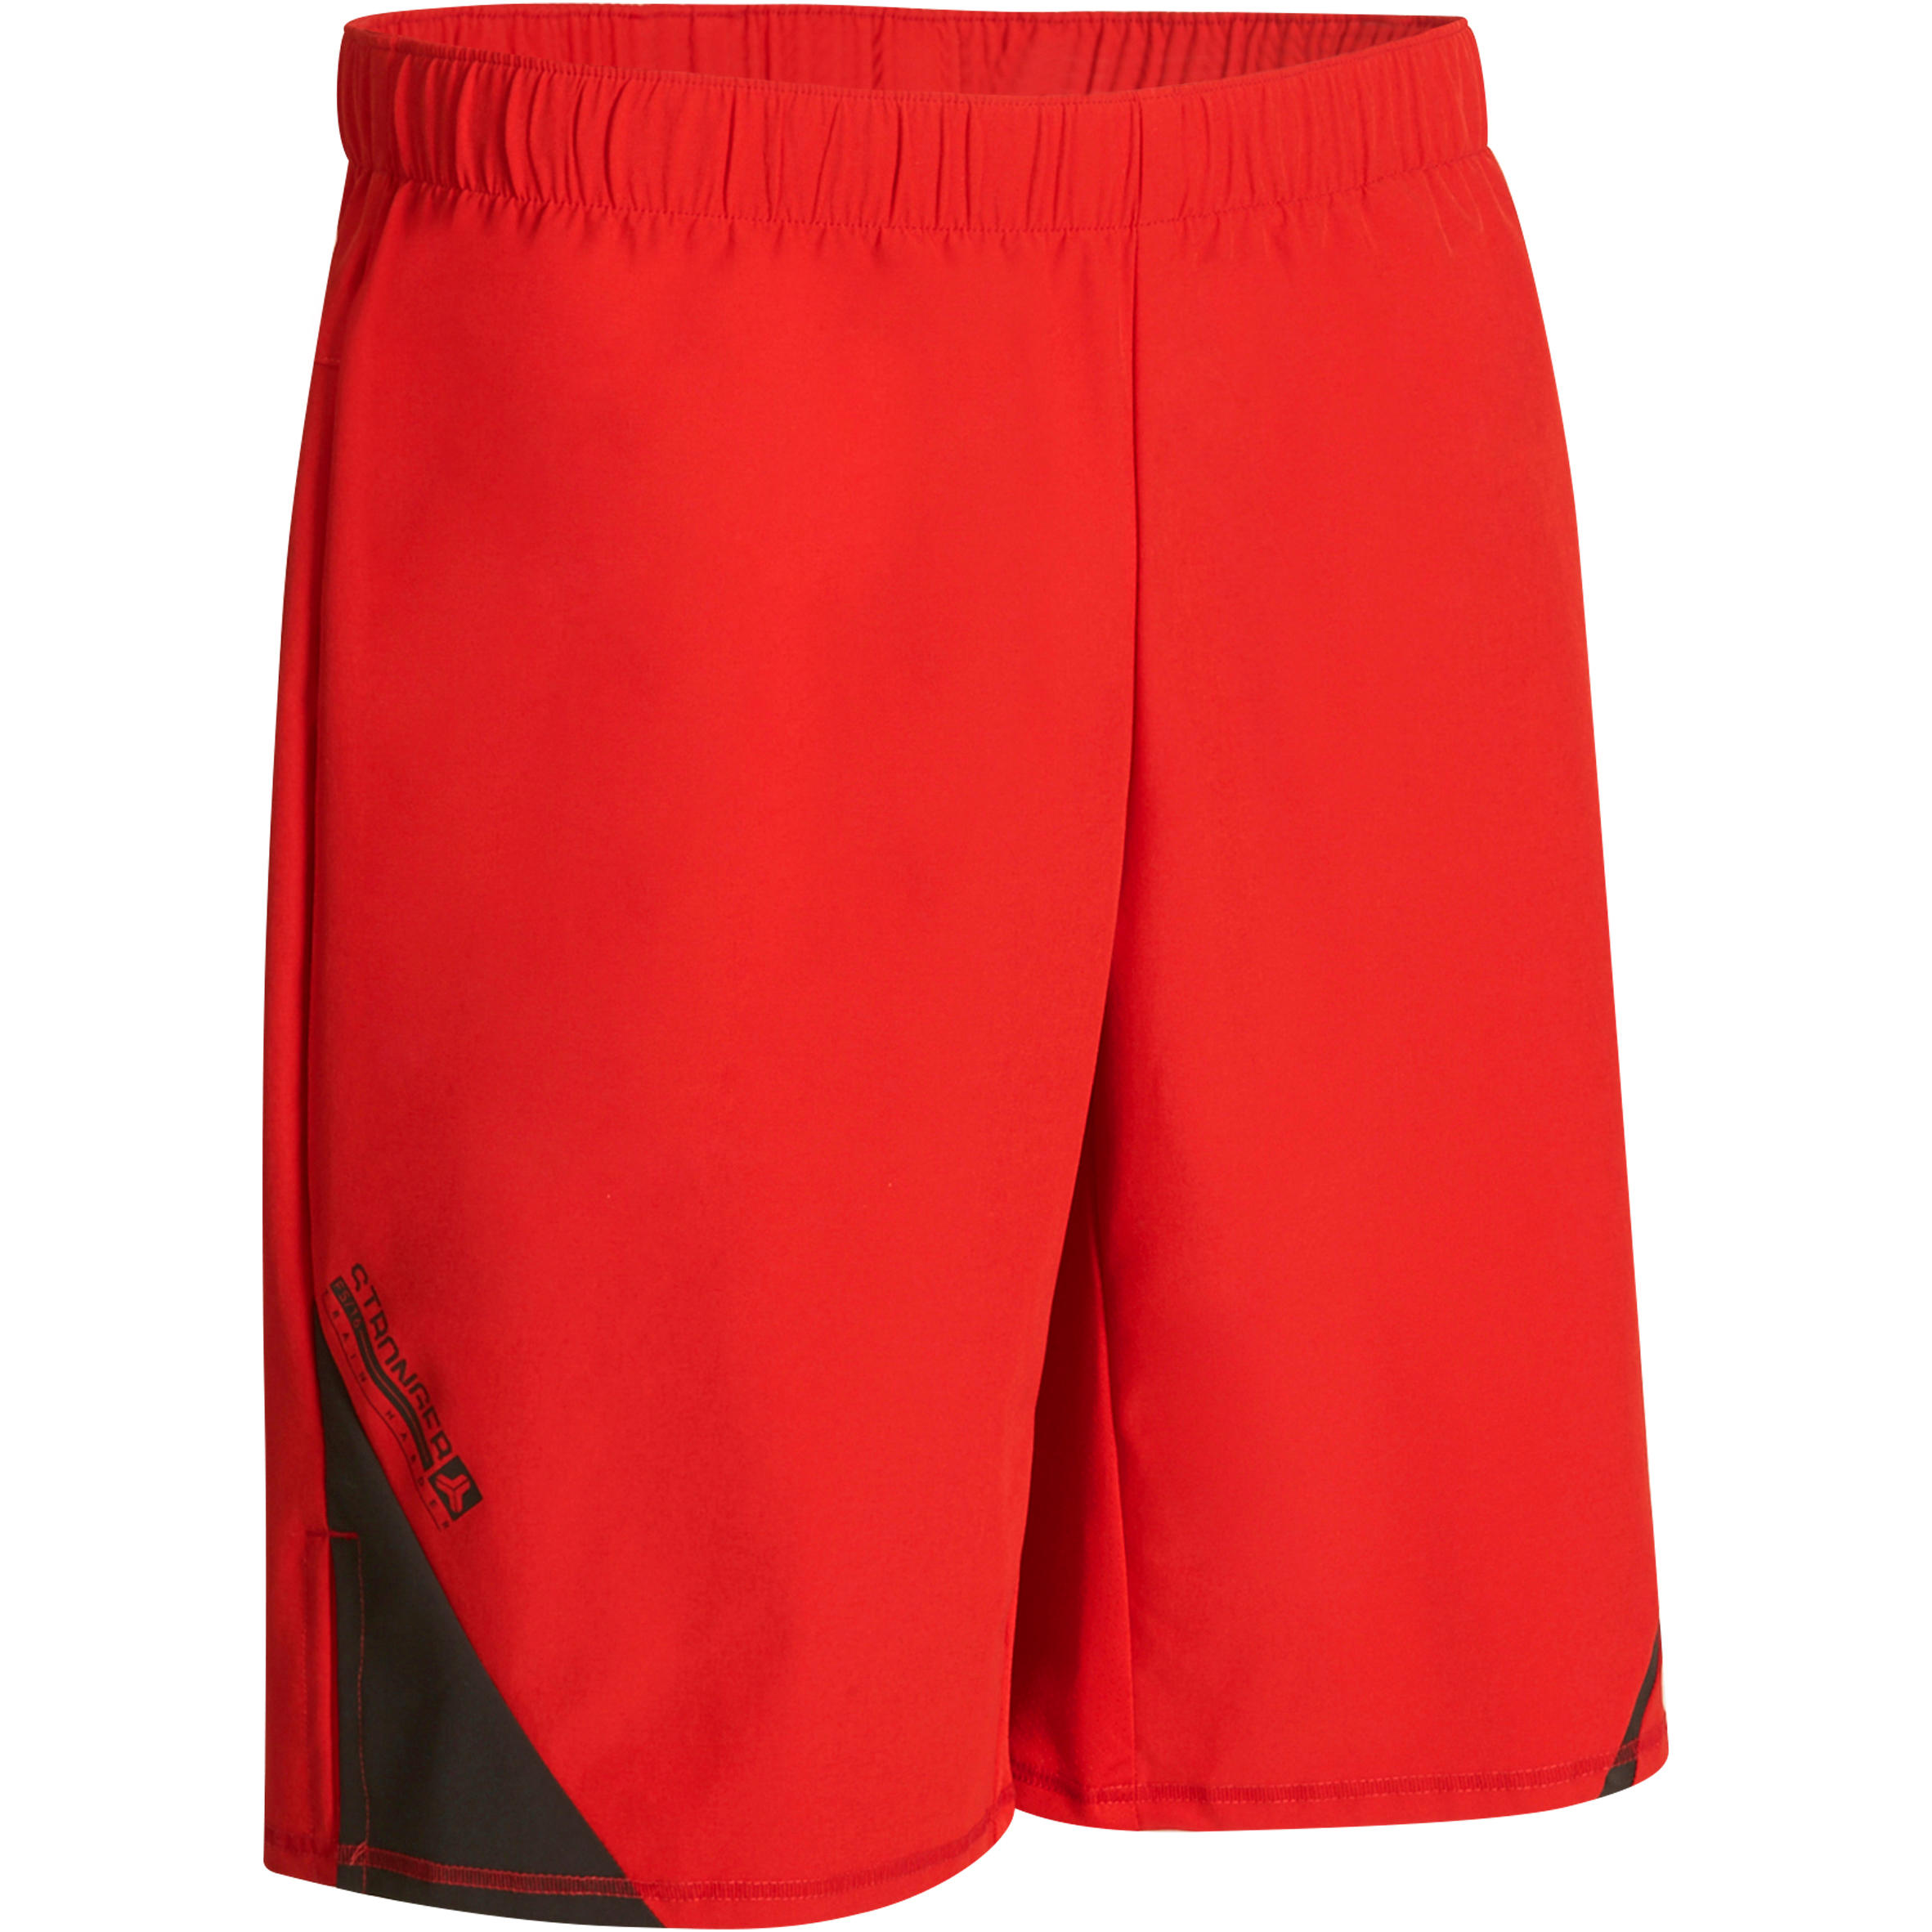 DOMYOS Muscle+ Bodybuilding Shorts - Red